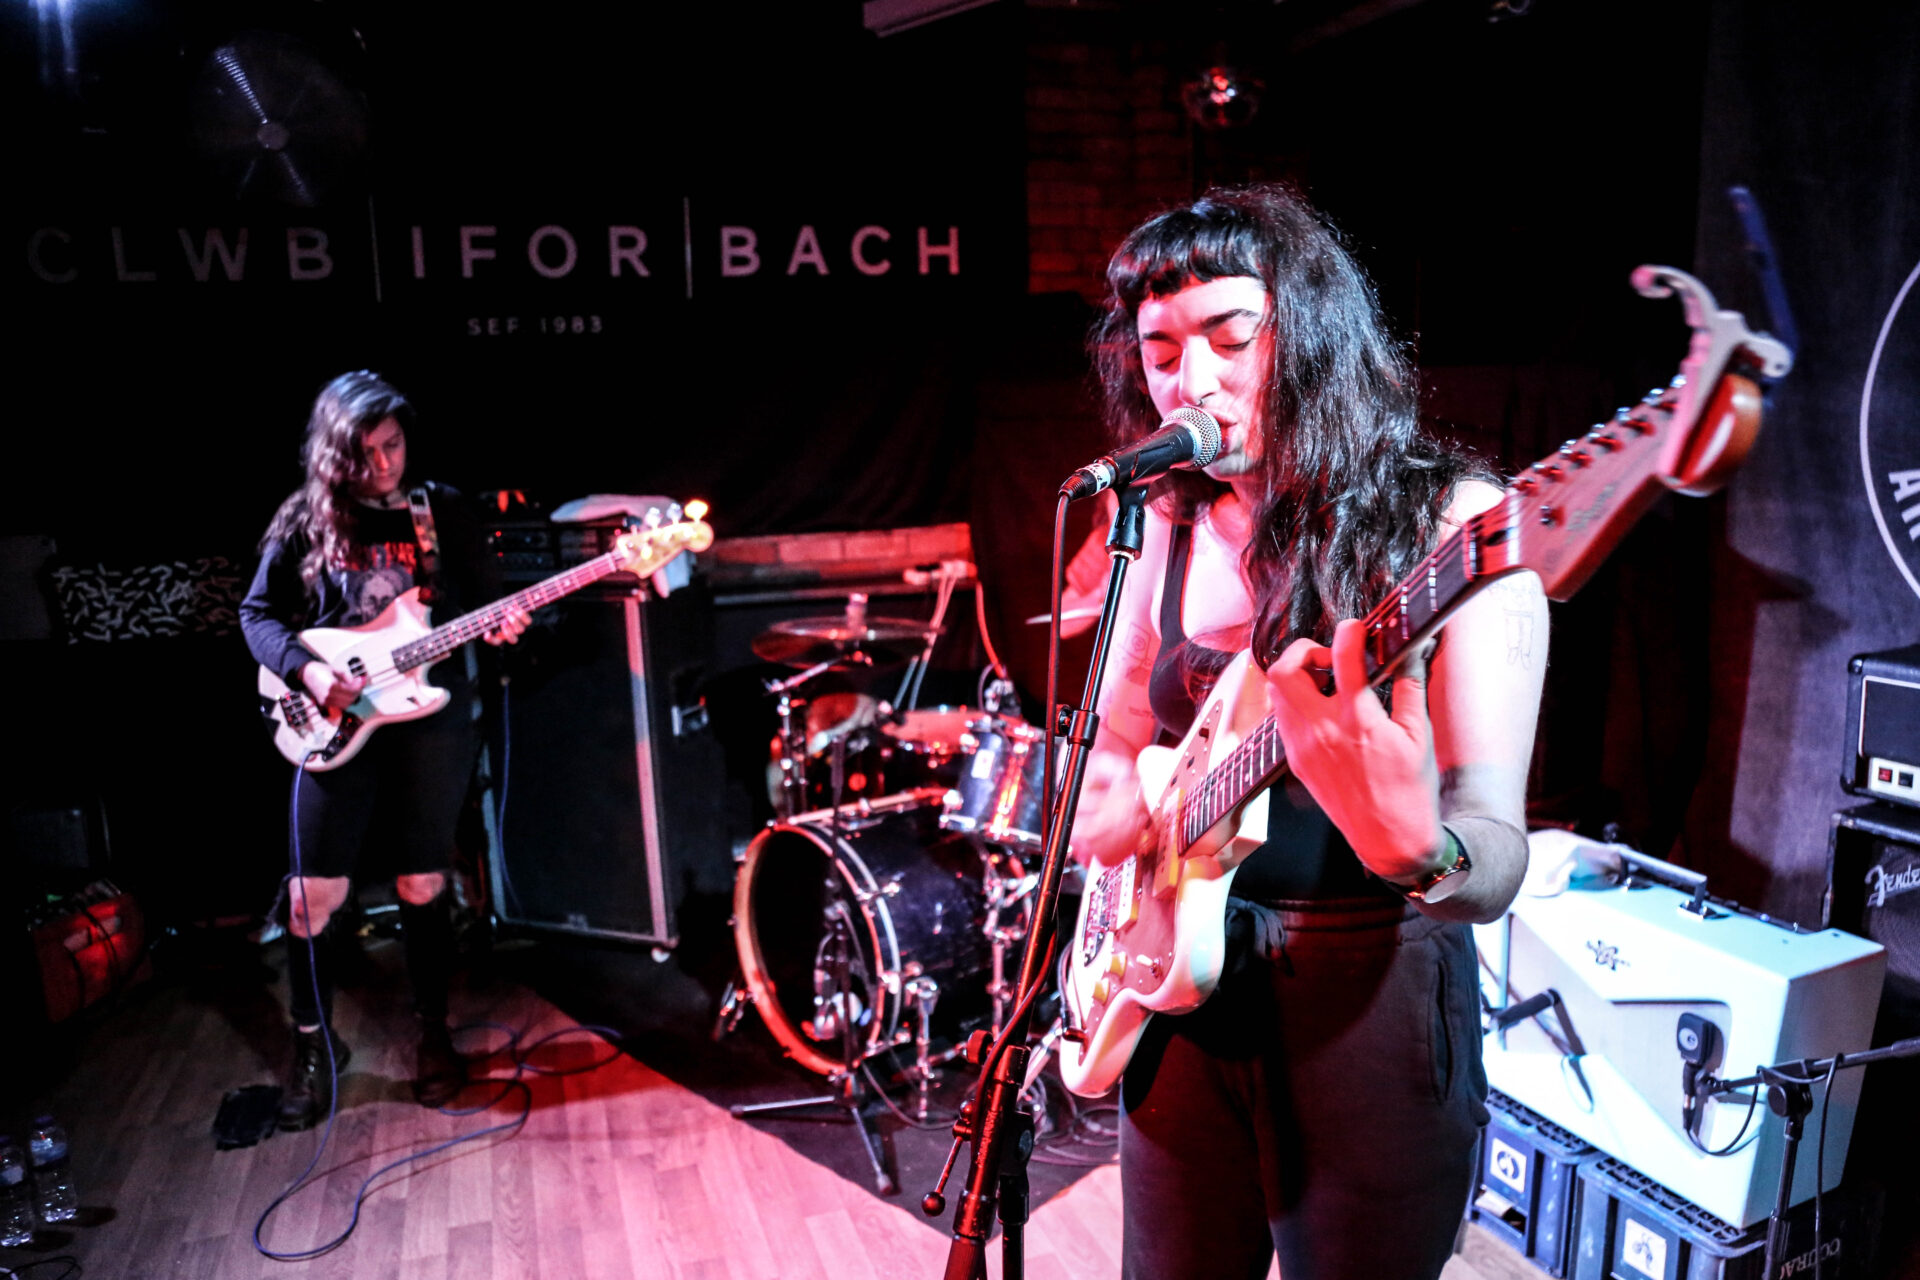 Camp Cope, Caves, Live, Do Nothing - Clwb Ifor Bach, Cardiff, 29/08/2018 1